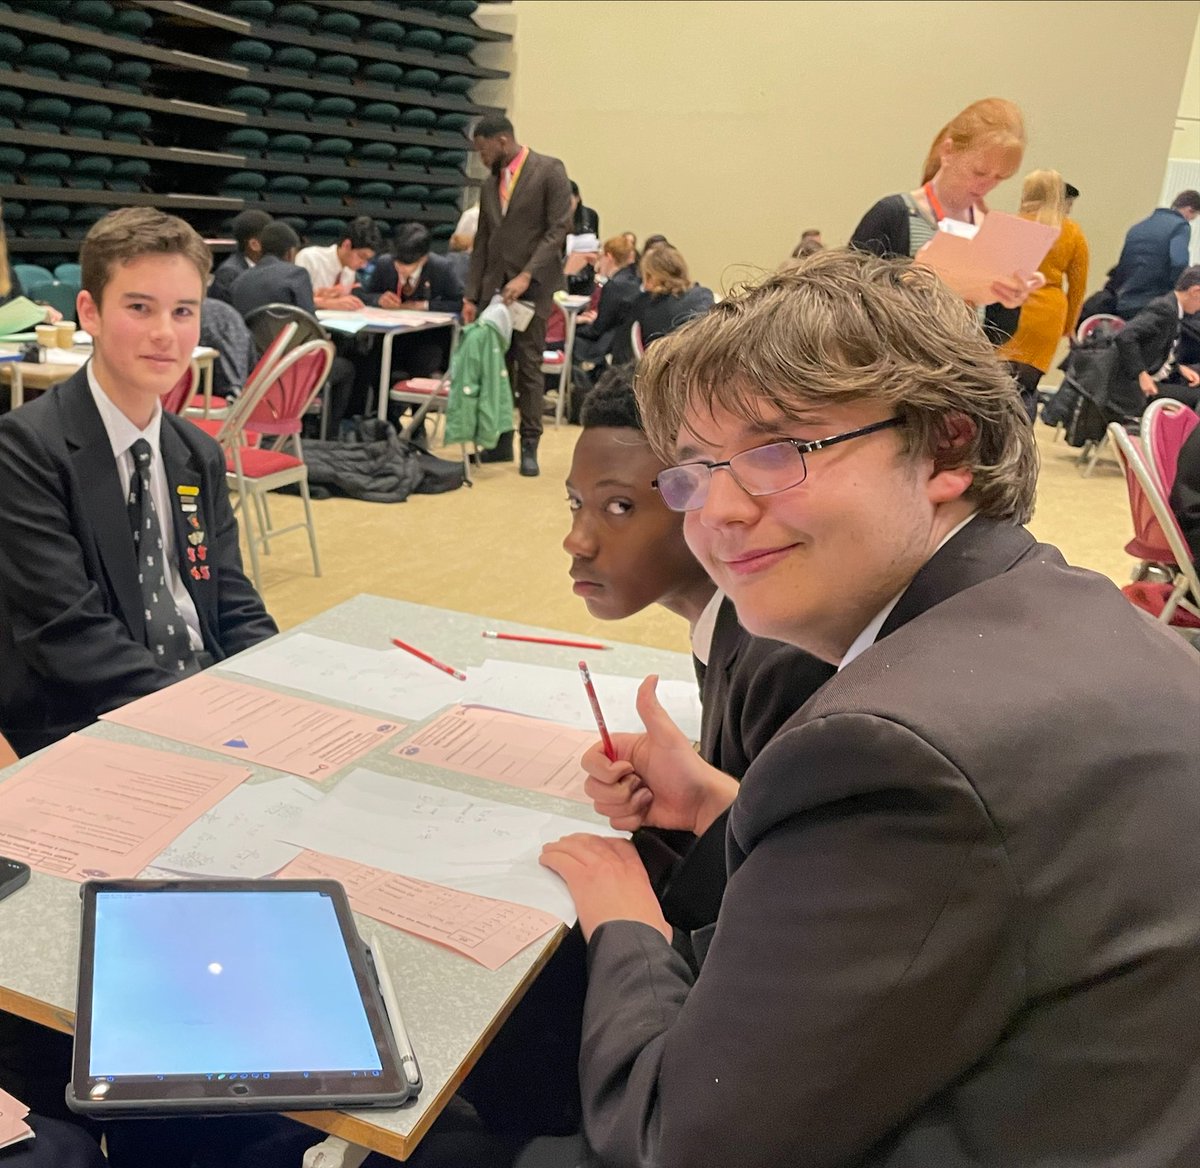 #KingJohnSchool hosted the annual #Year10 #Maths Feast for the local area of Southend and Chelmsford. The event is a fun educational maths event designed to challenge students who are hungry to work on their mathematical and teamwork skills! #KingJohn #Benfleet #Zenith